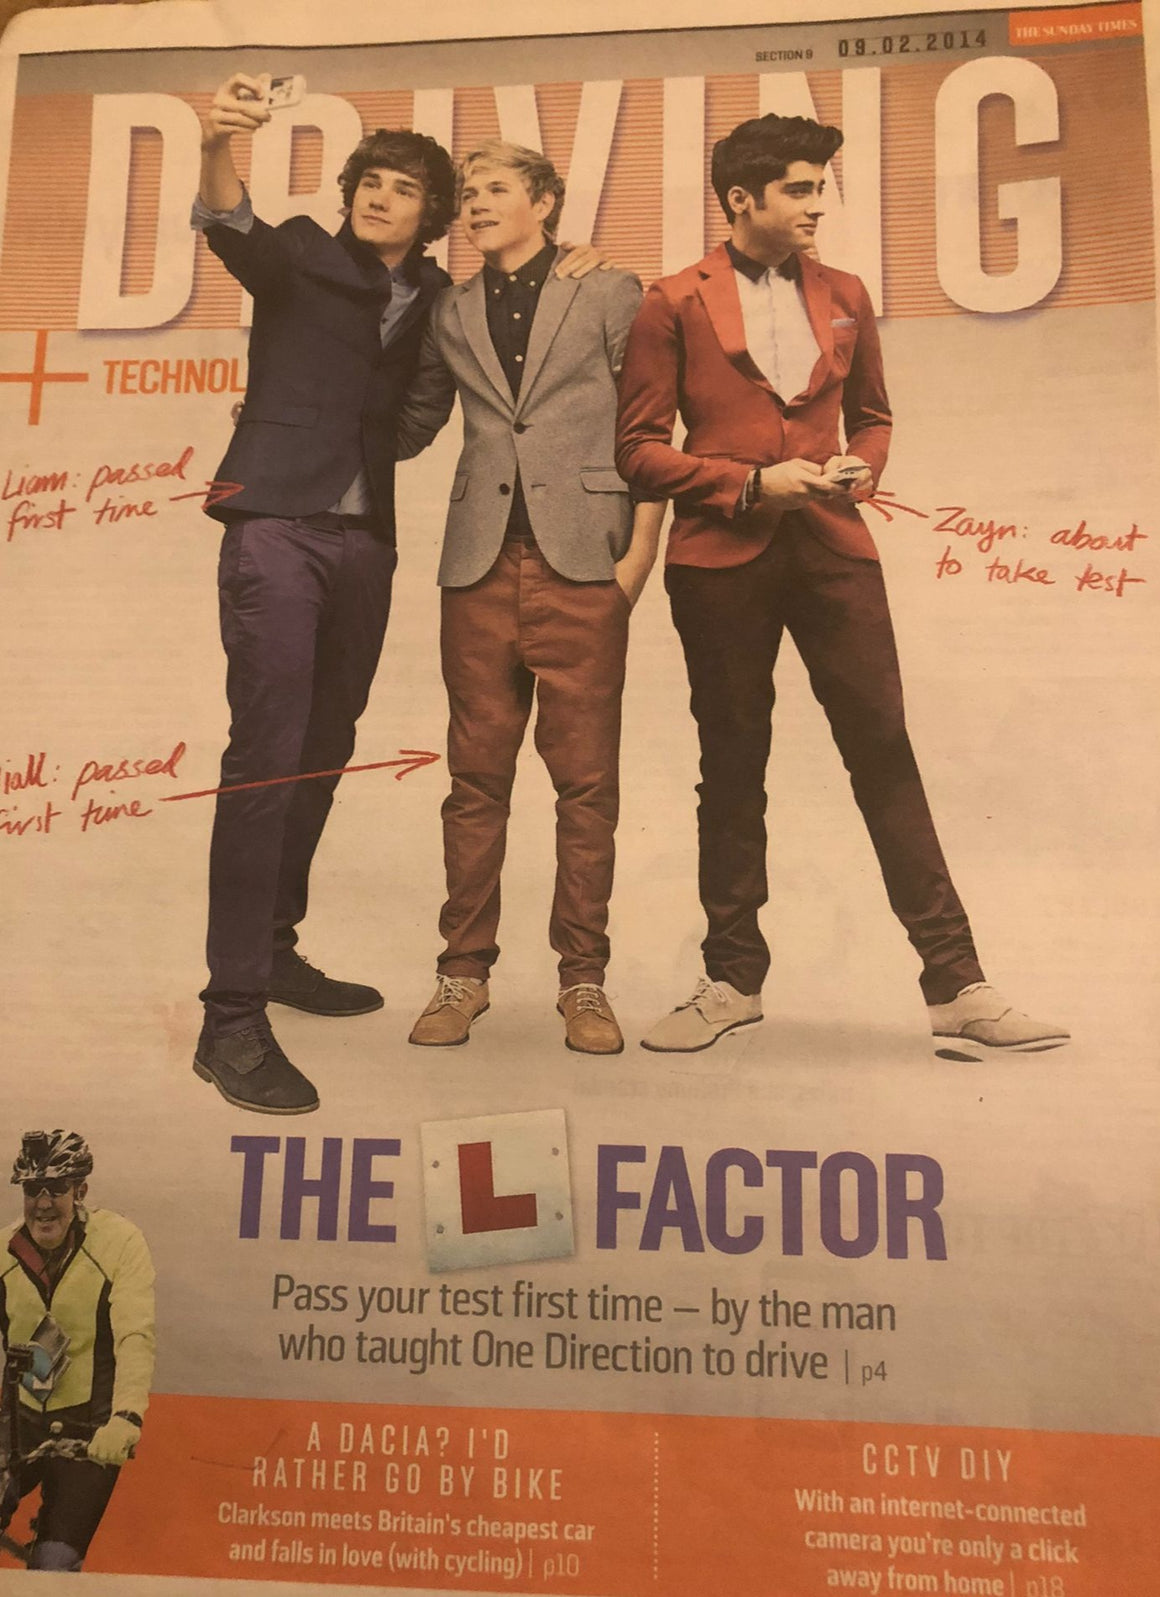 ONE DIRECTION (1D) Niall Horan Zayn Malik IN GEAR COVER EXCLUSIVE UK SUPPLEMENT